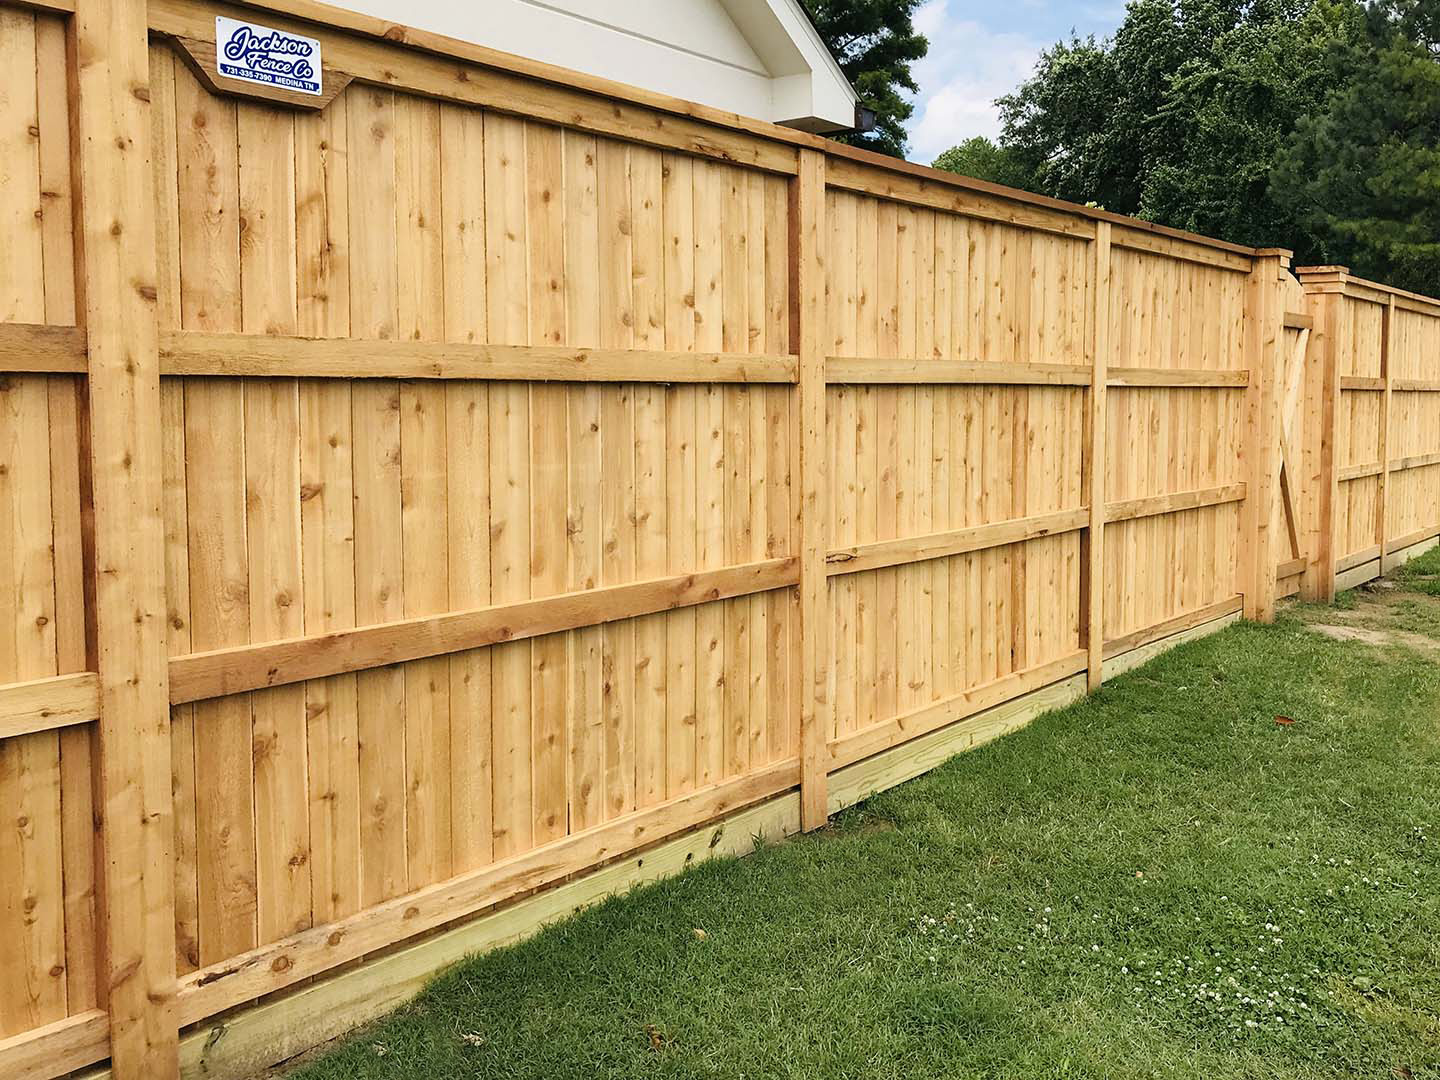  Milan Tennessee wood privacy fencing